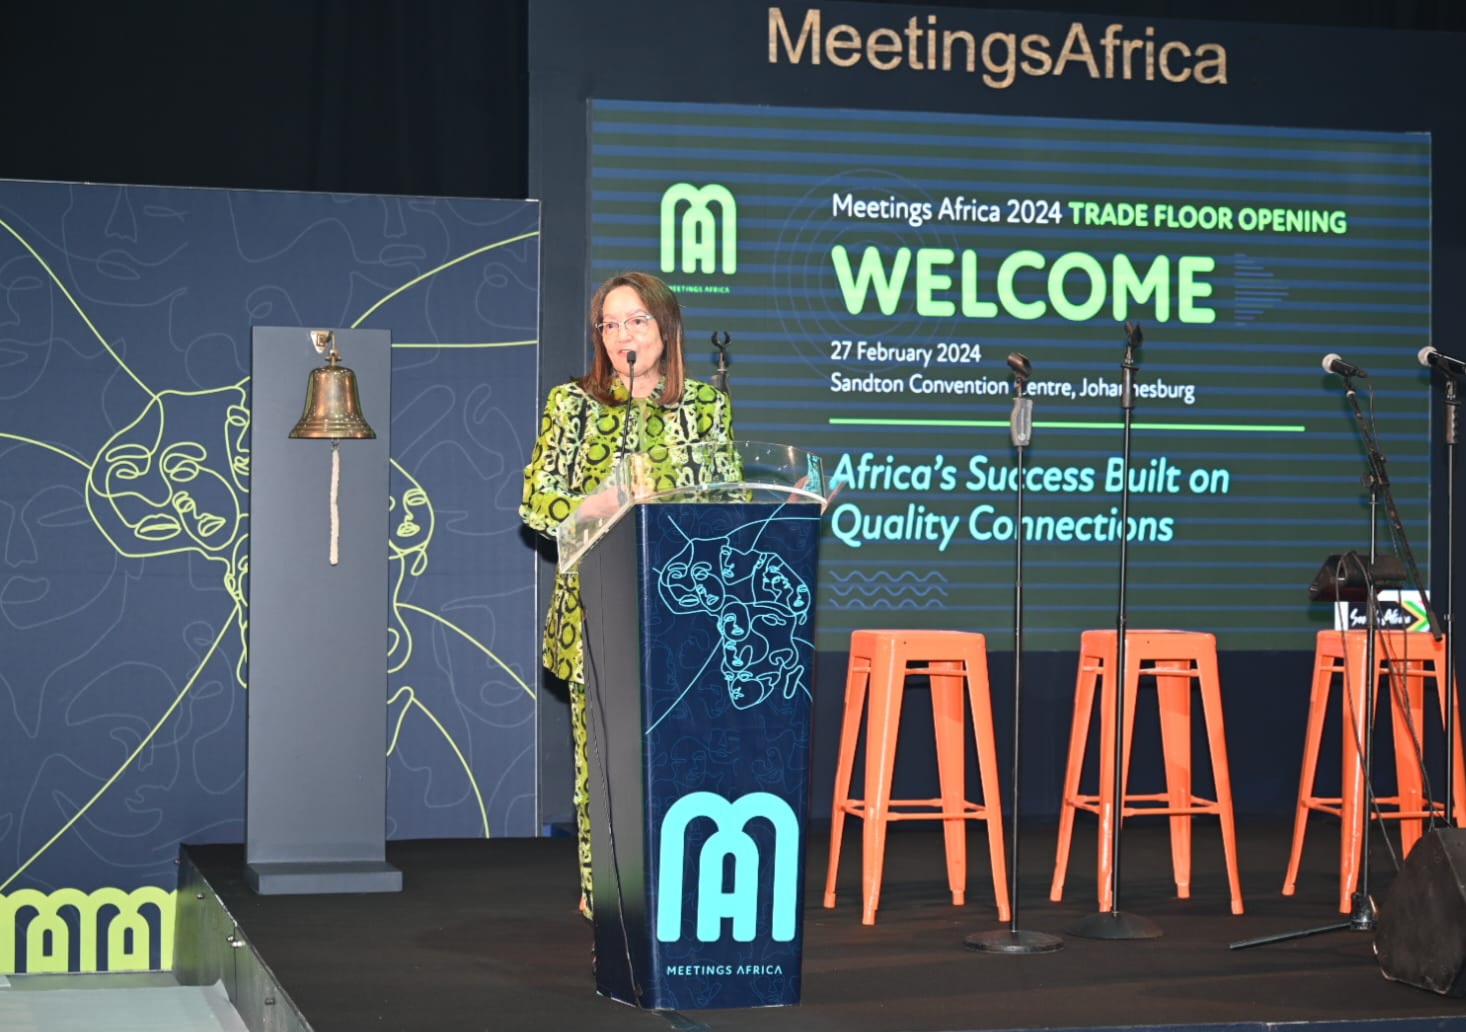 Speech by Minister of Tourism, Patrice de Lille at the opening ceremony of Meetings Africa 2024